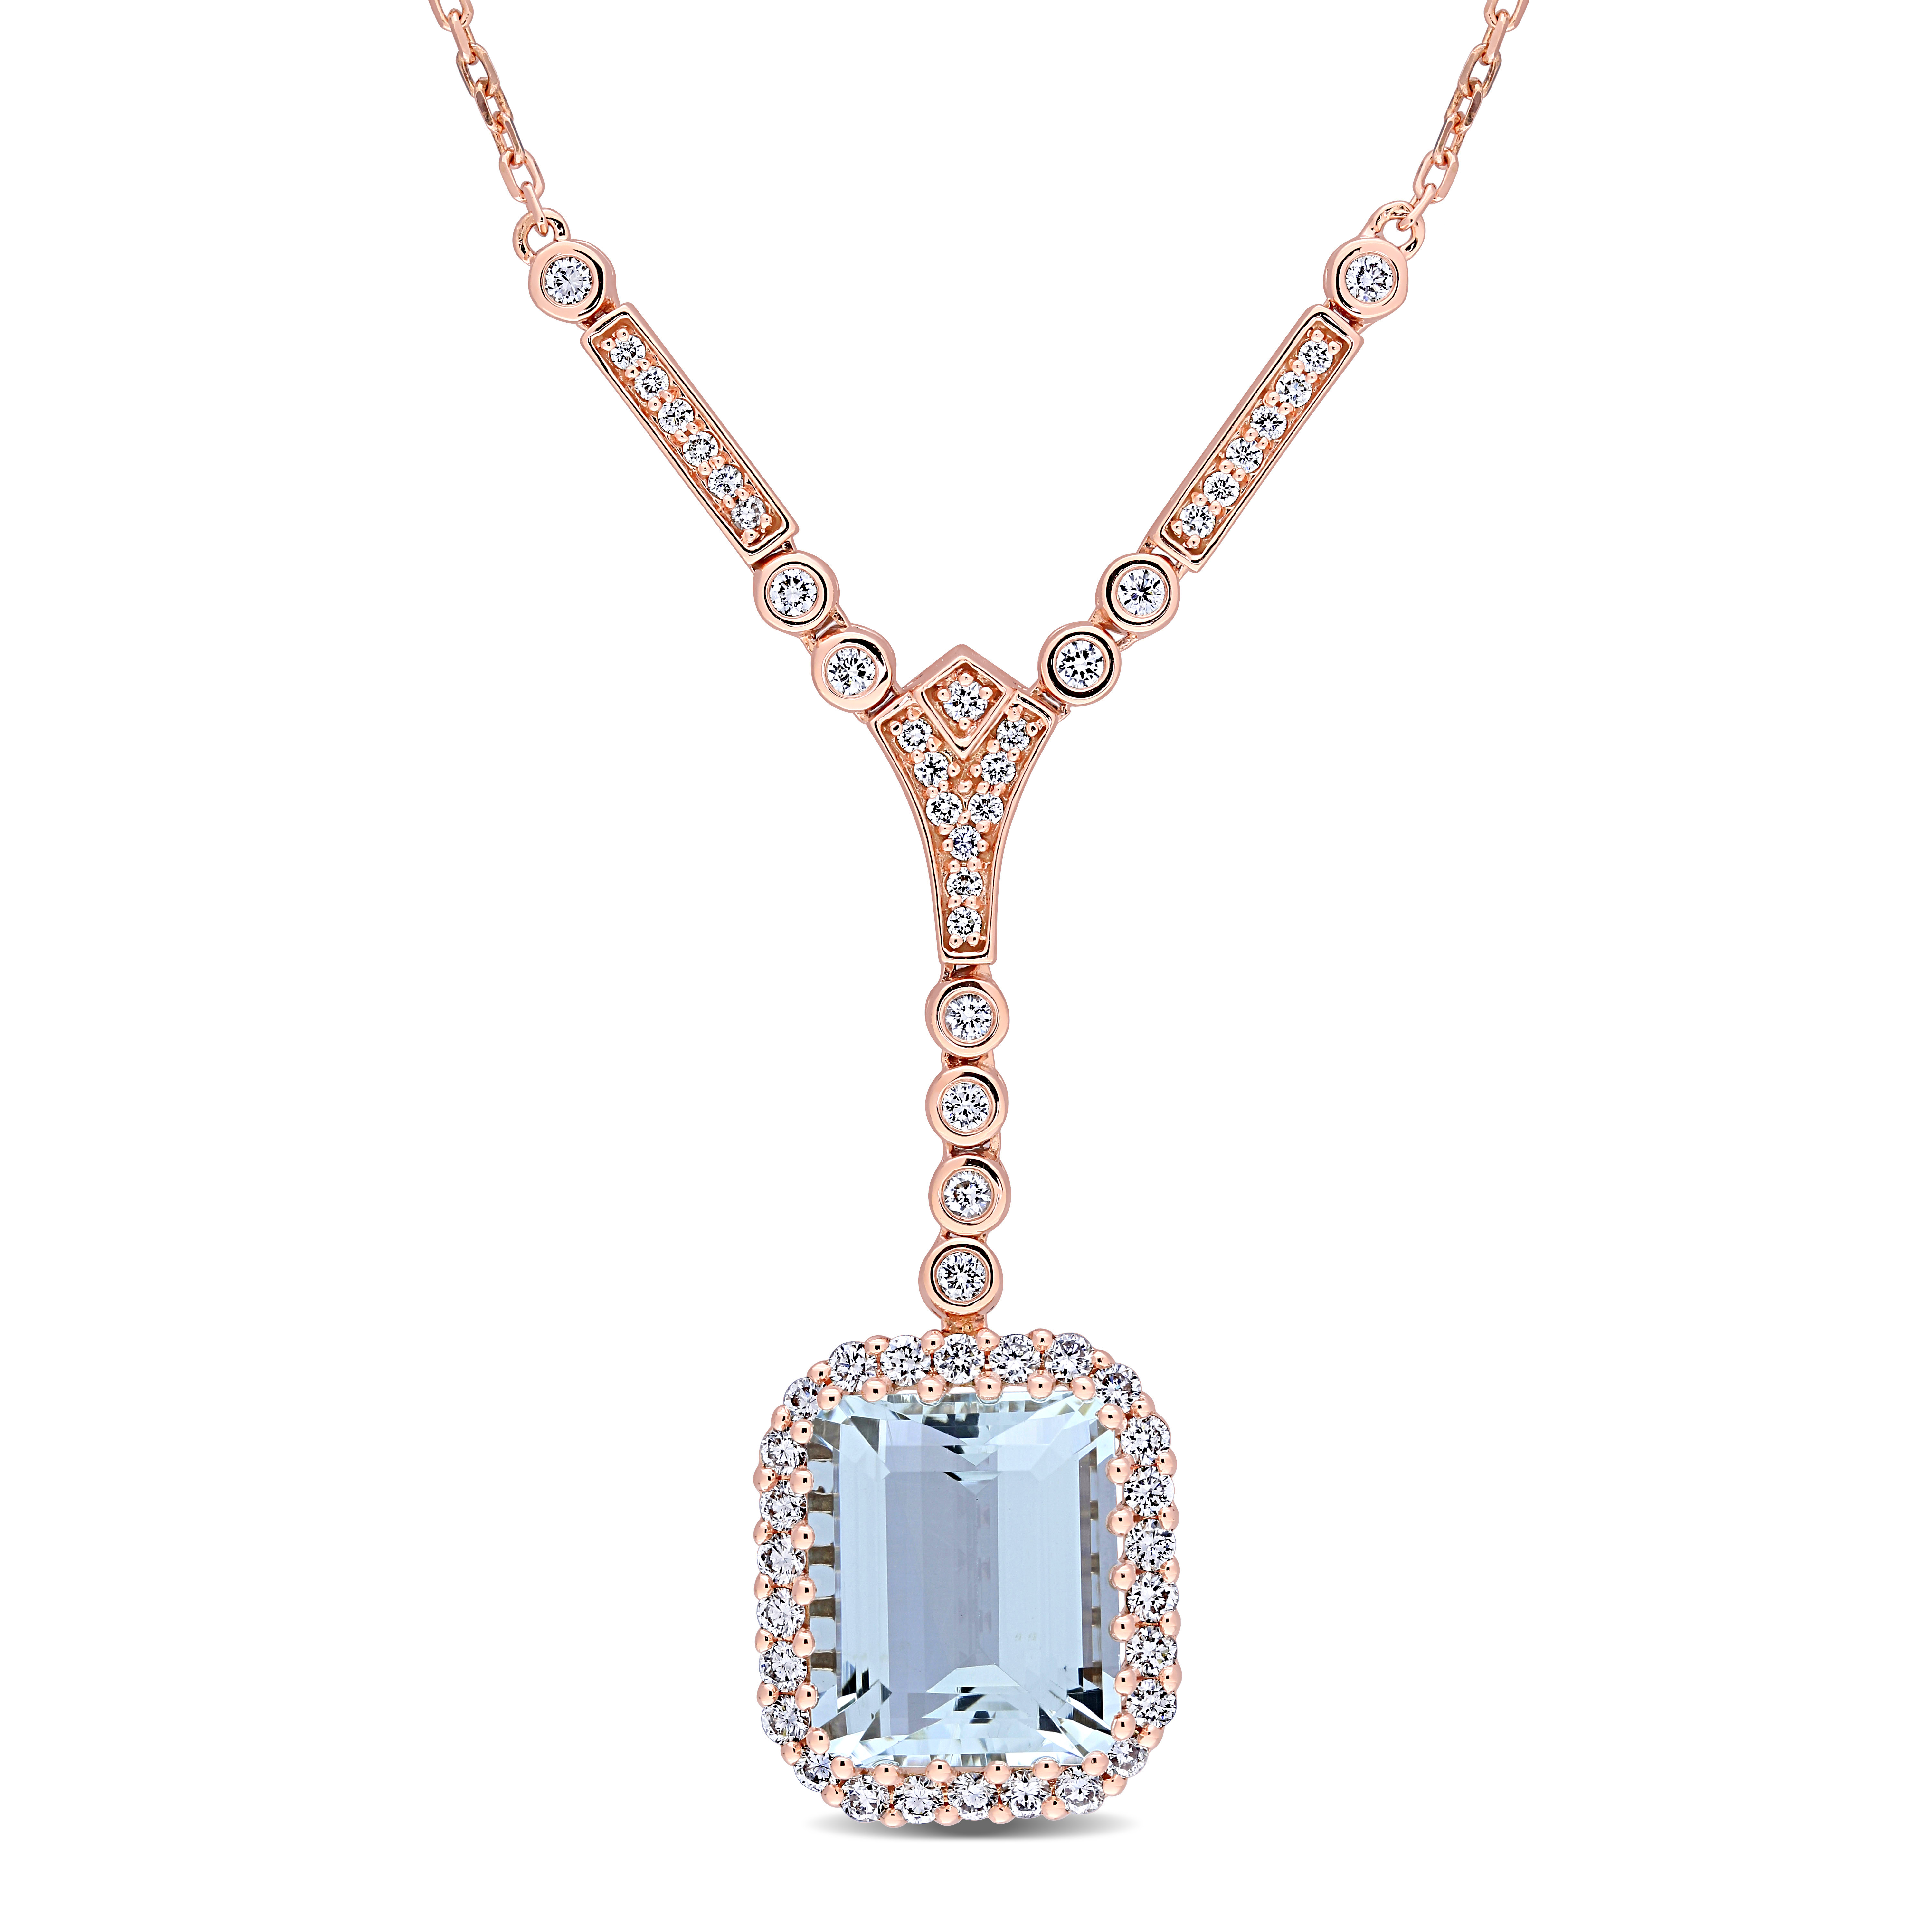 5 2/5 CT TGW Aquamarine and 3/4 CT TW Diamond Drop Necklace in 14k Rose Gold - 17 in.